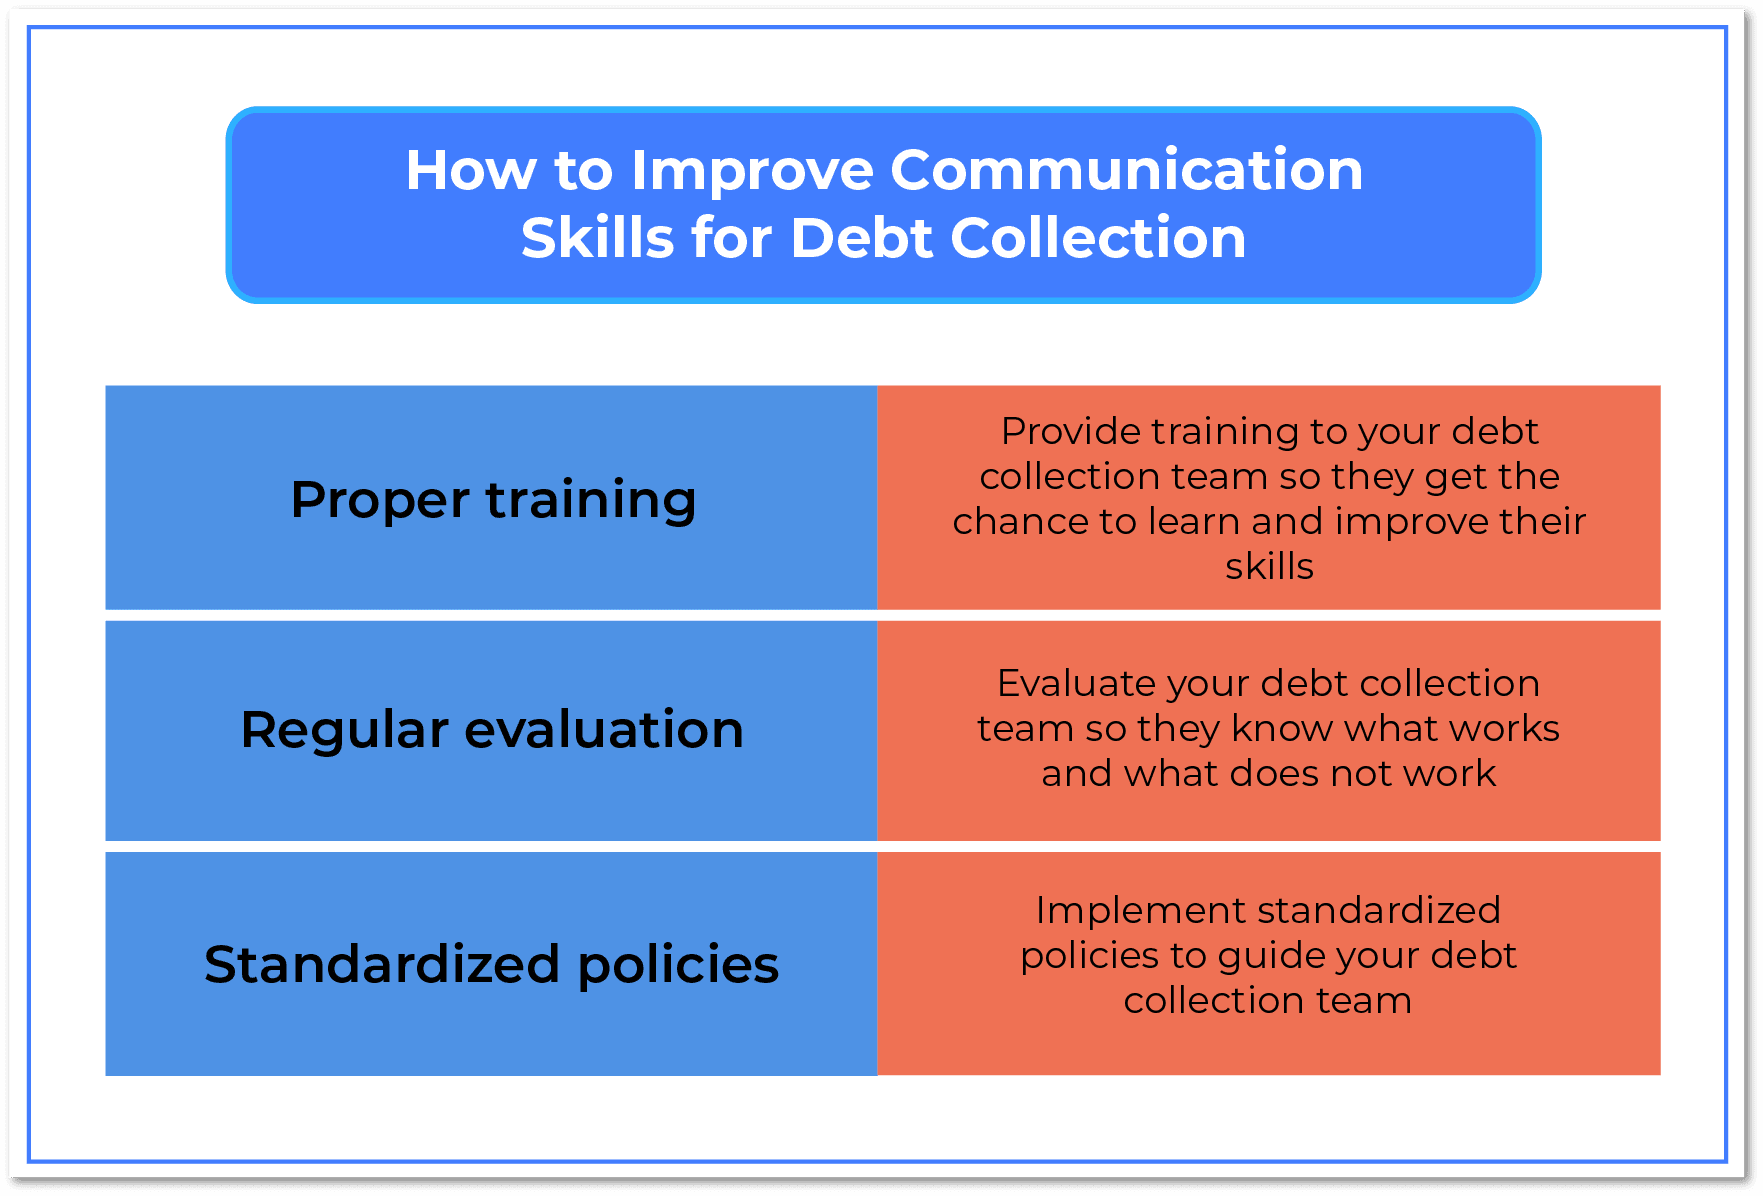 How to Improve Communication Skills for Debt Collection